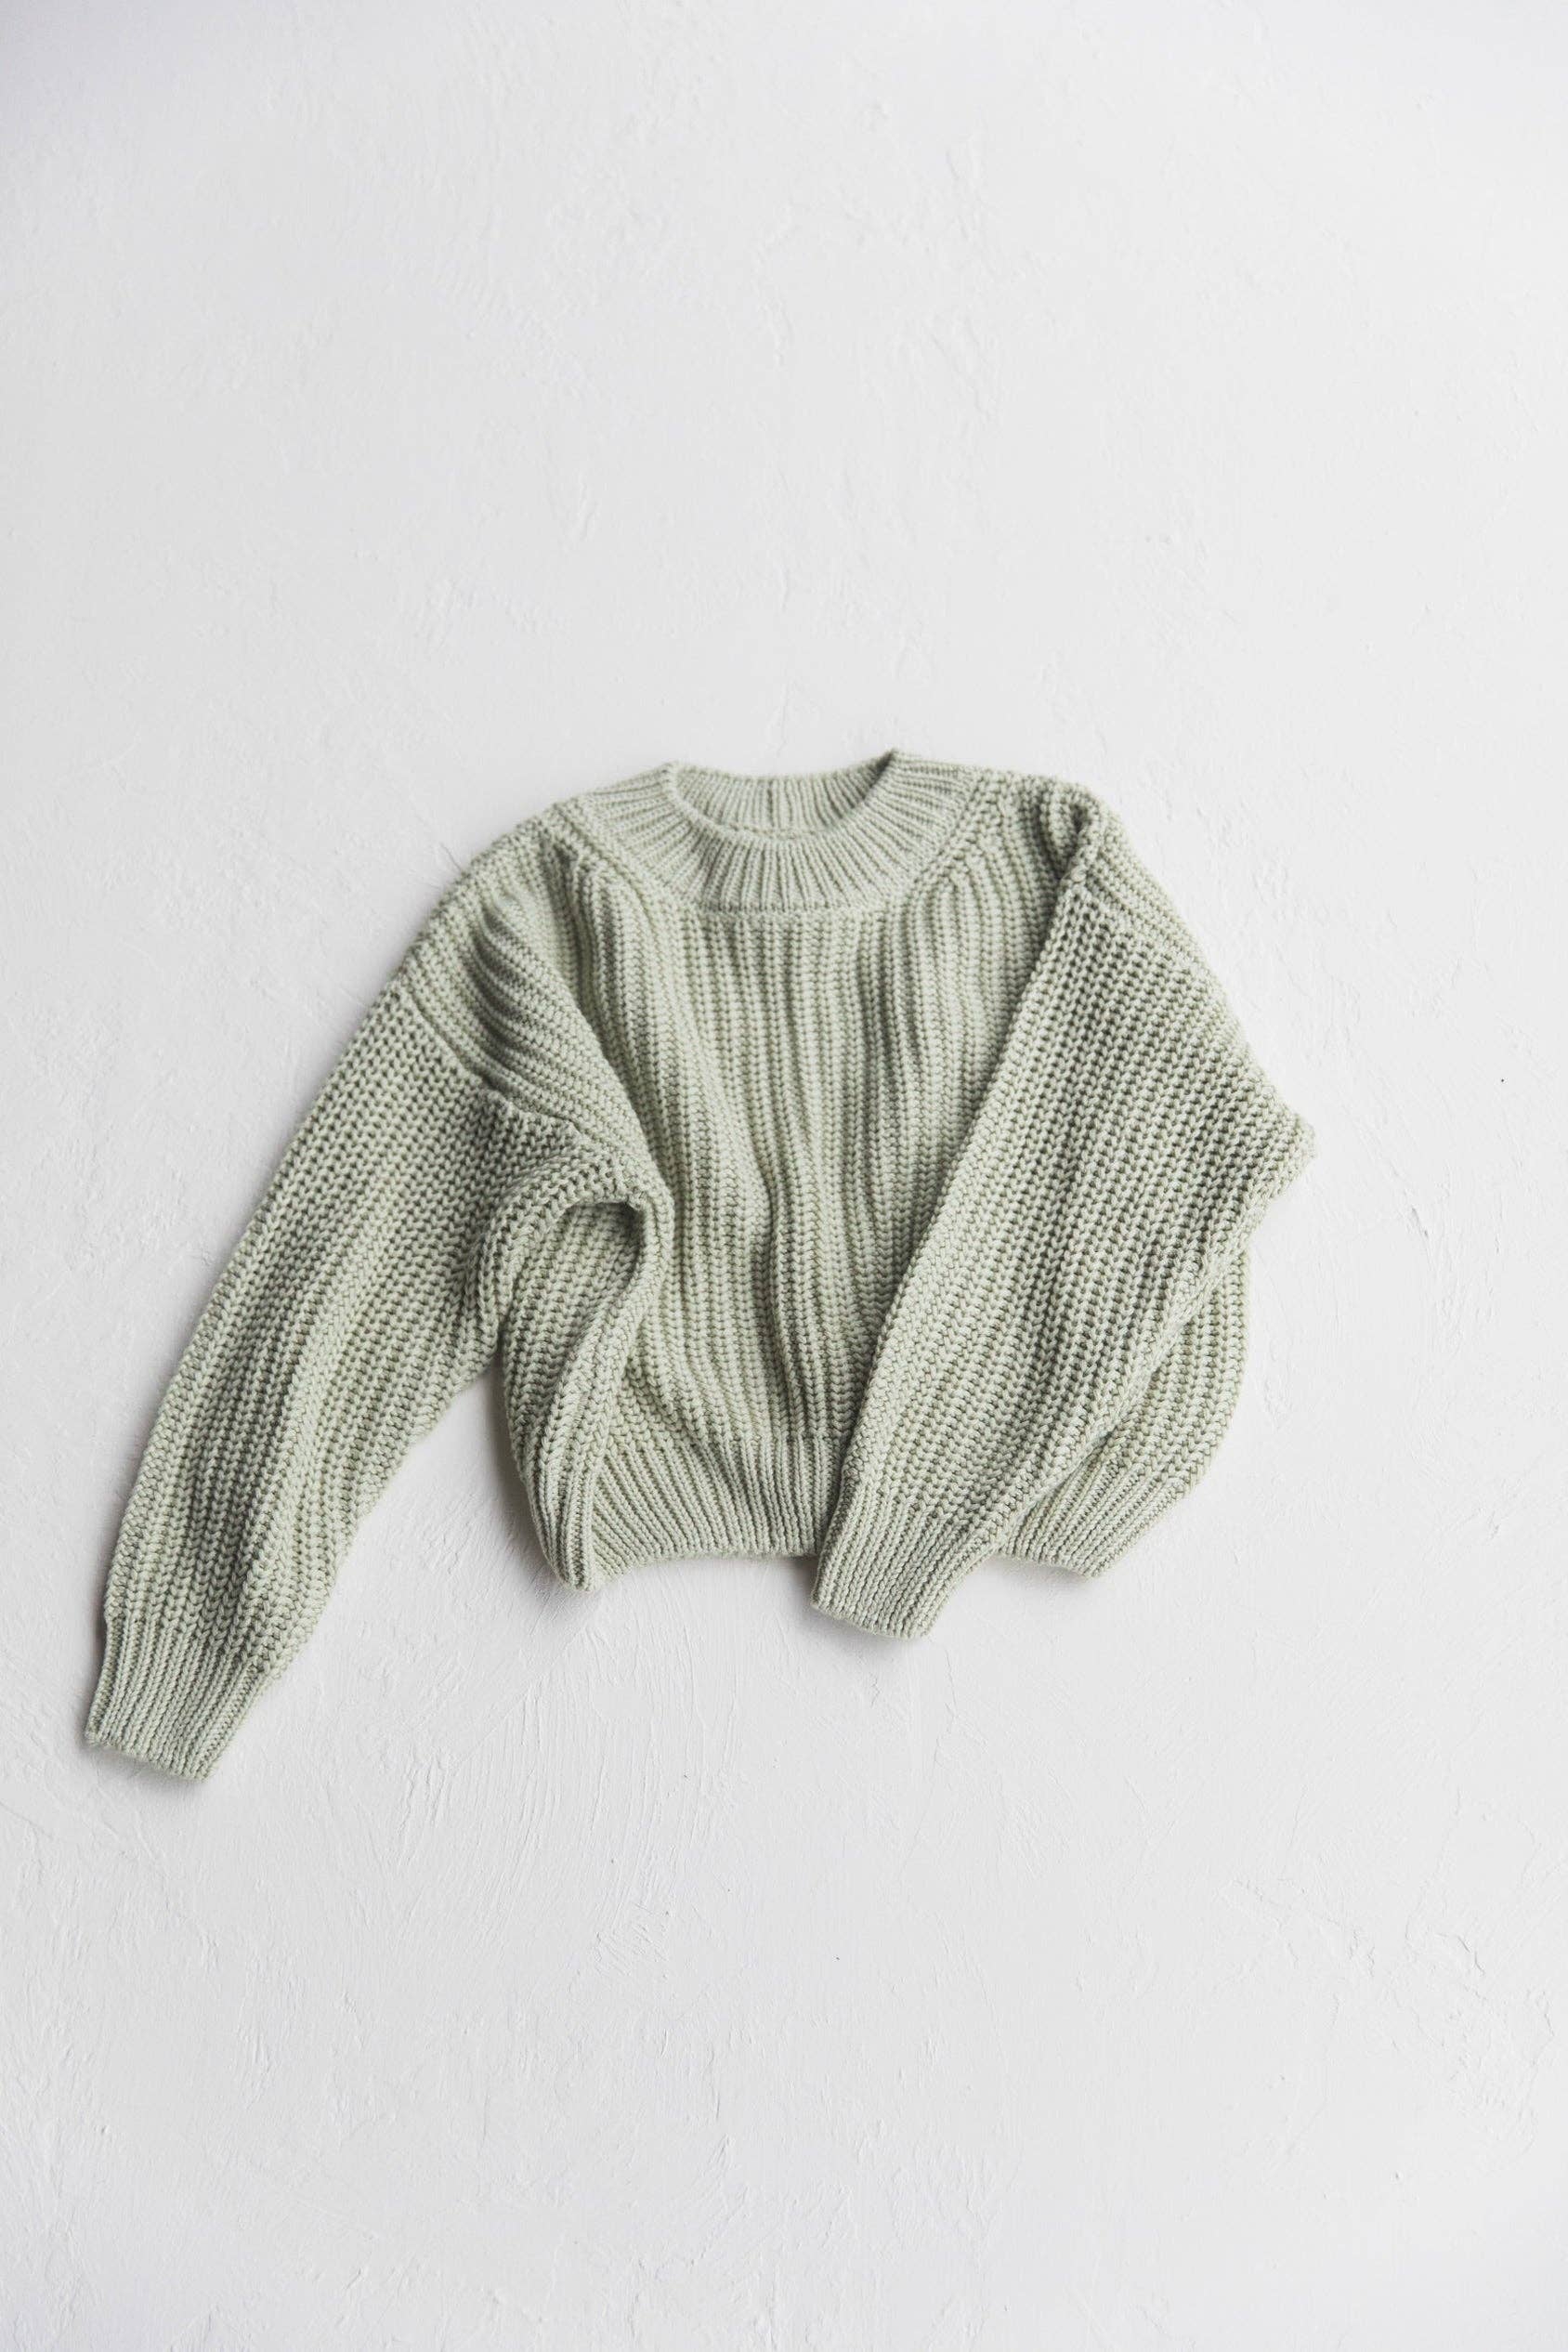 Cambria Sweater Raised By Water